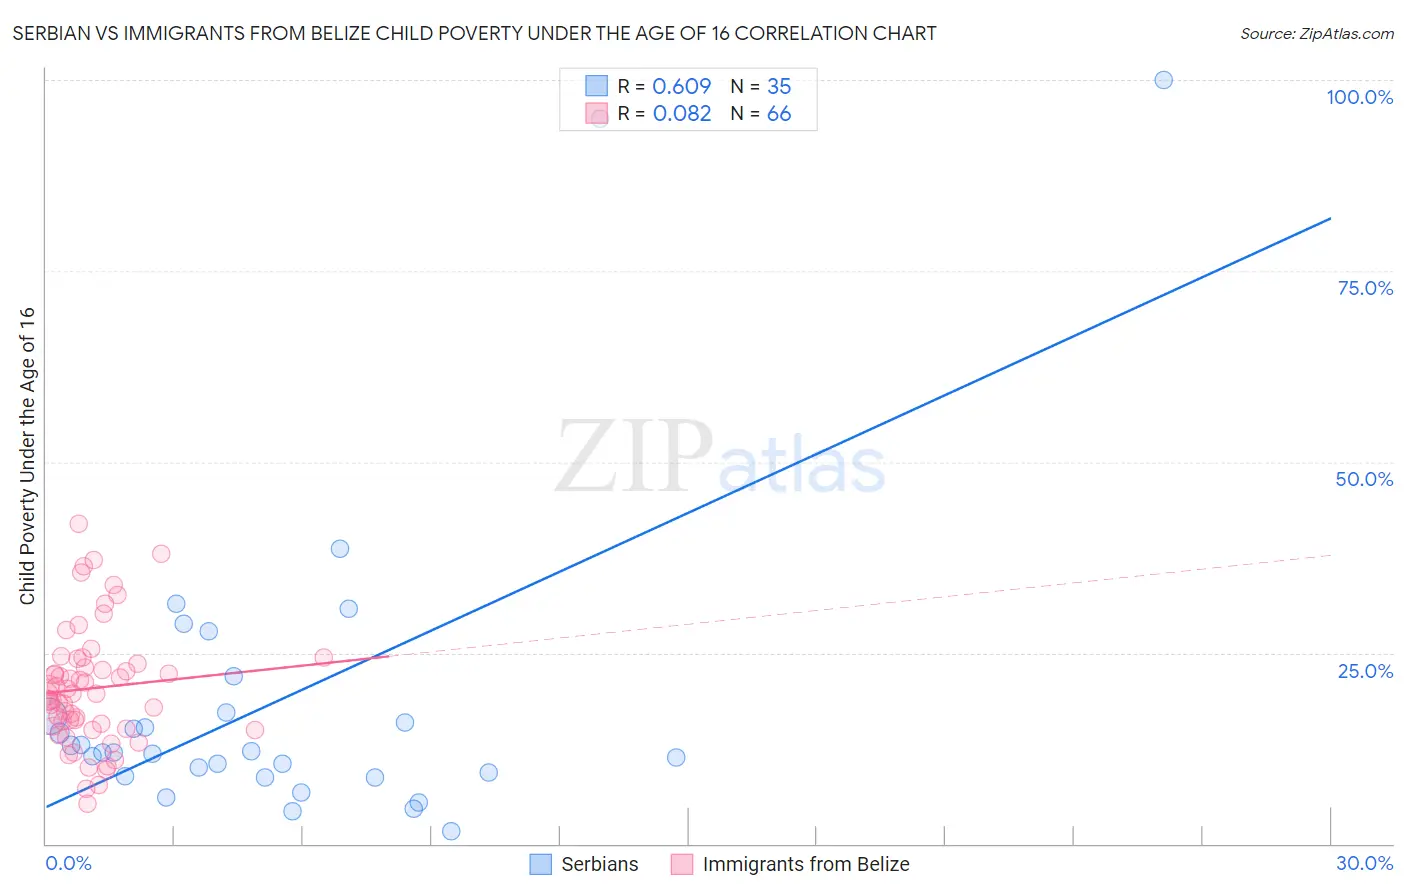 Serbian vs Immigrants from Belize Child Poverty Under the Age of 16